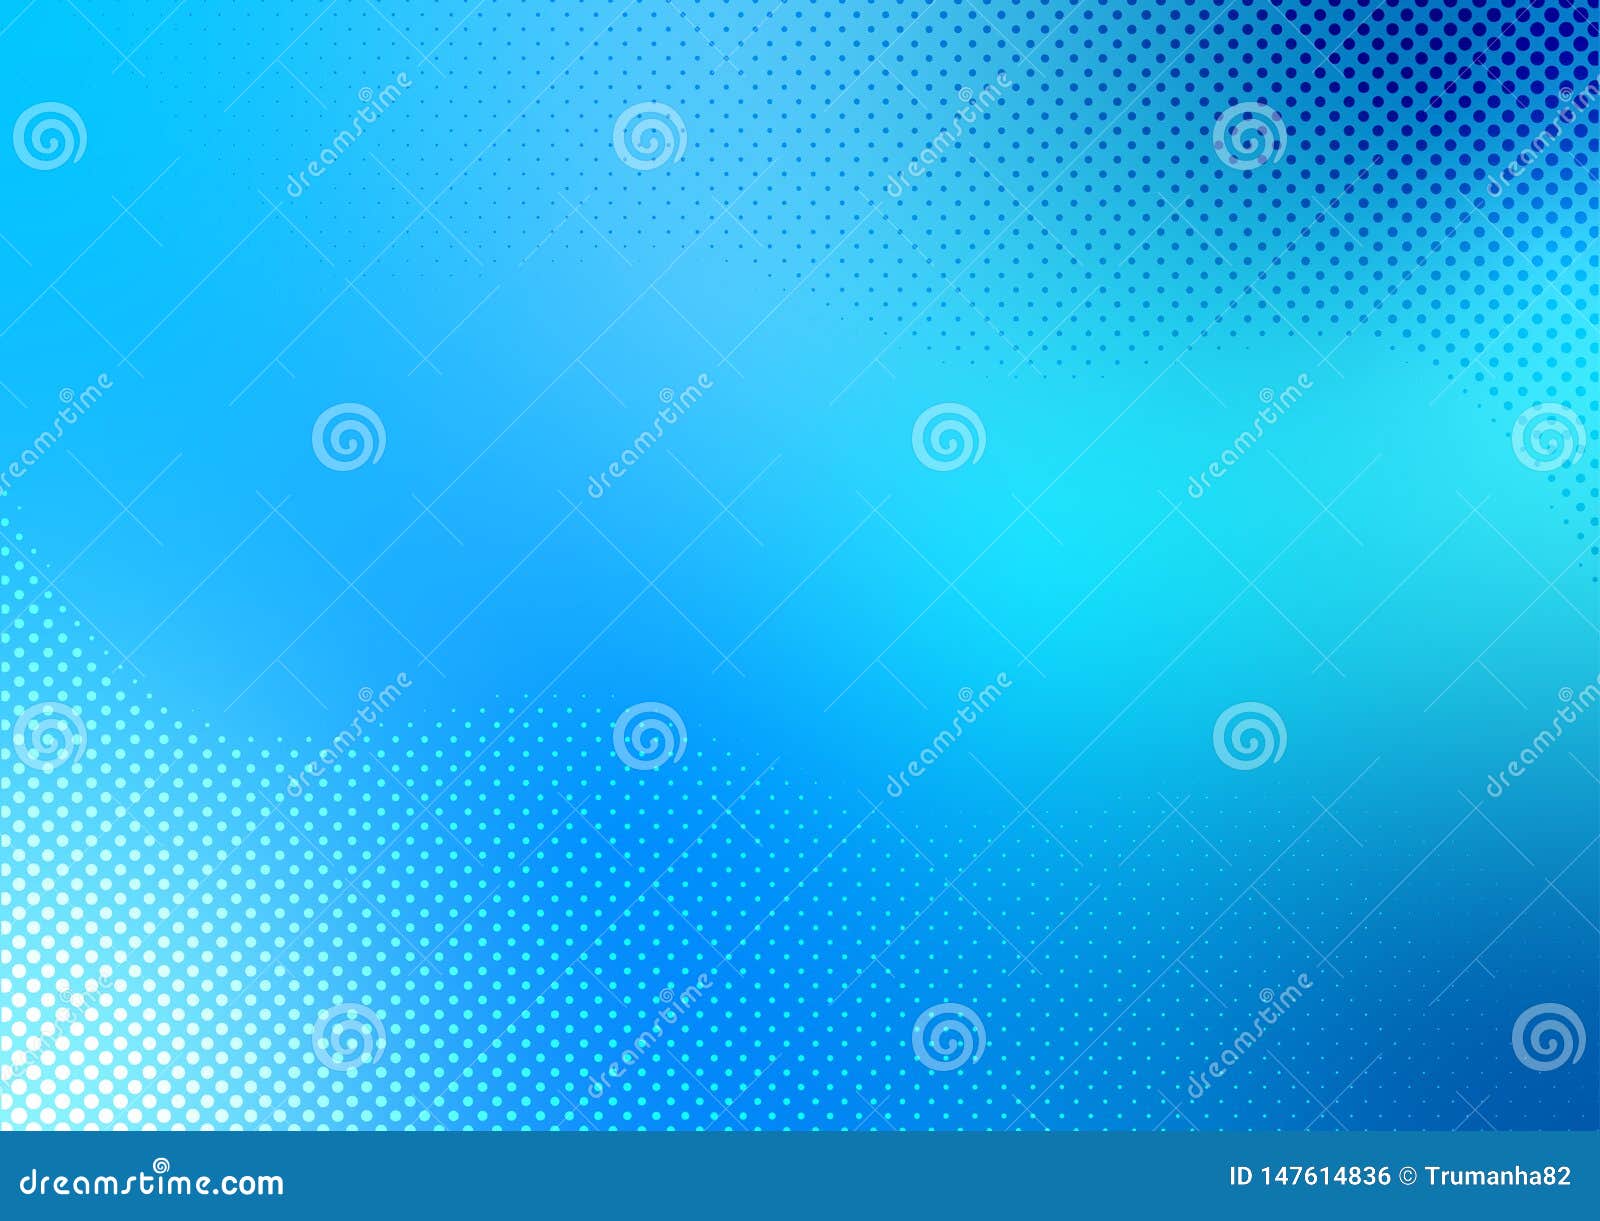 halftone dots pattern in blue and cyan background